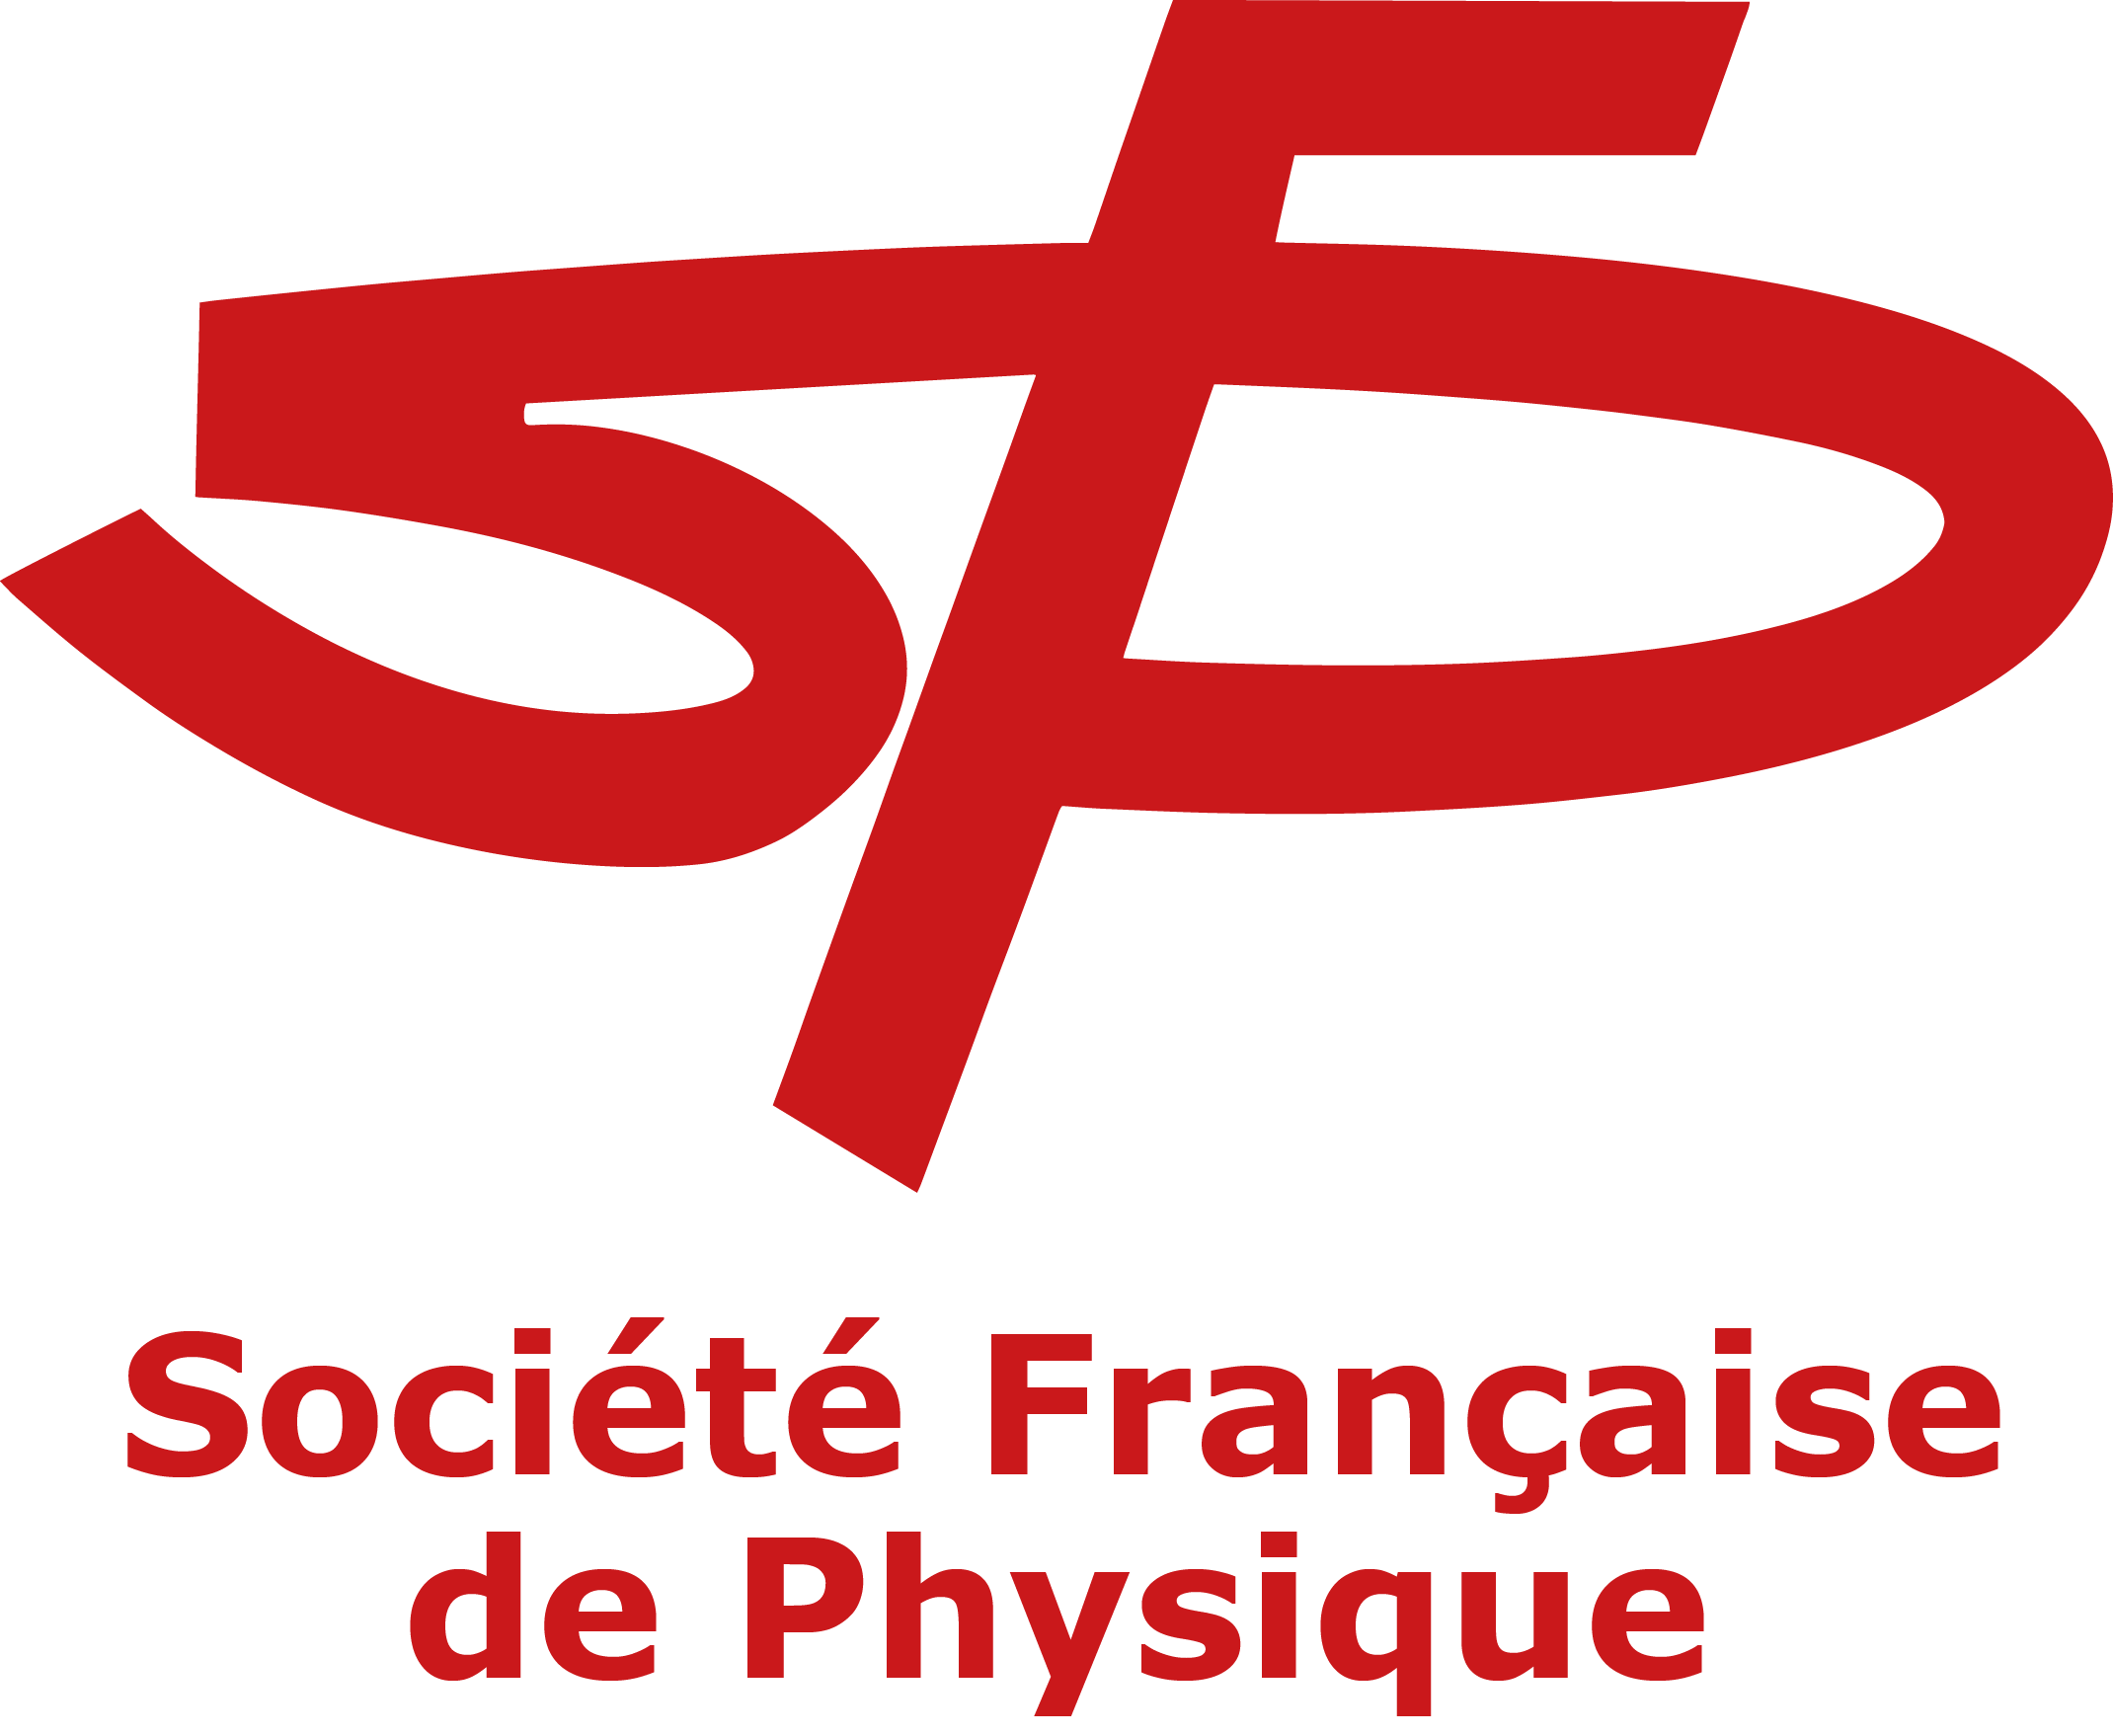 FRENCH PHYSICAL SOCIETY (SFP)